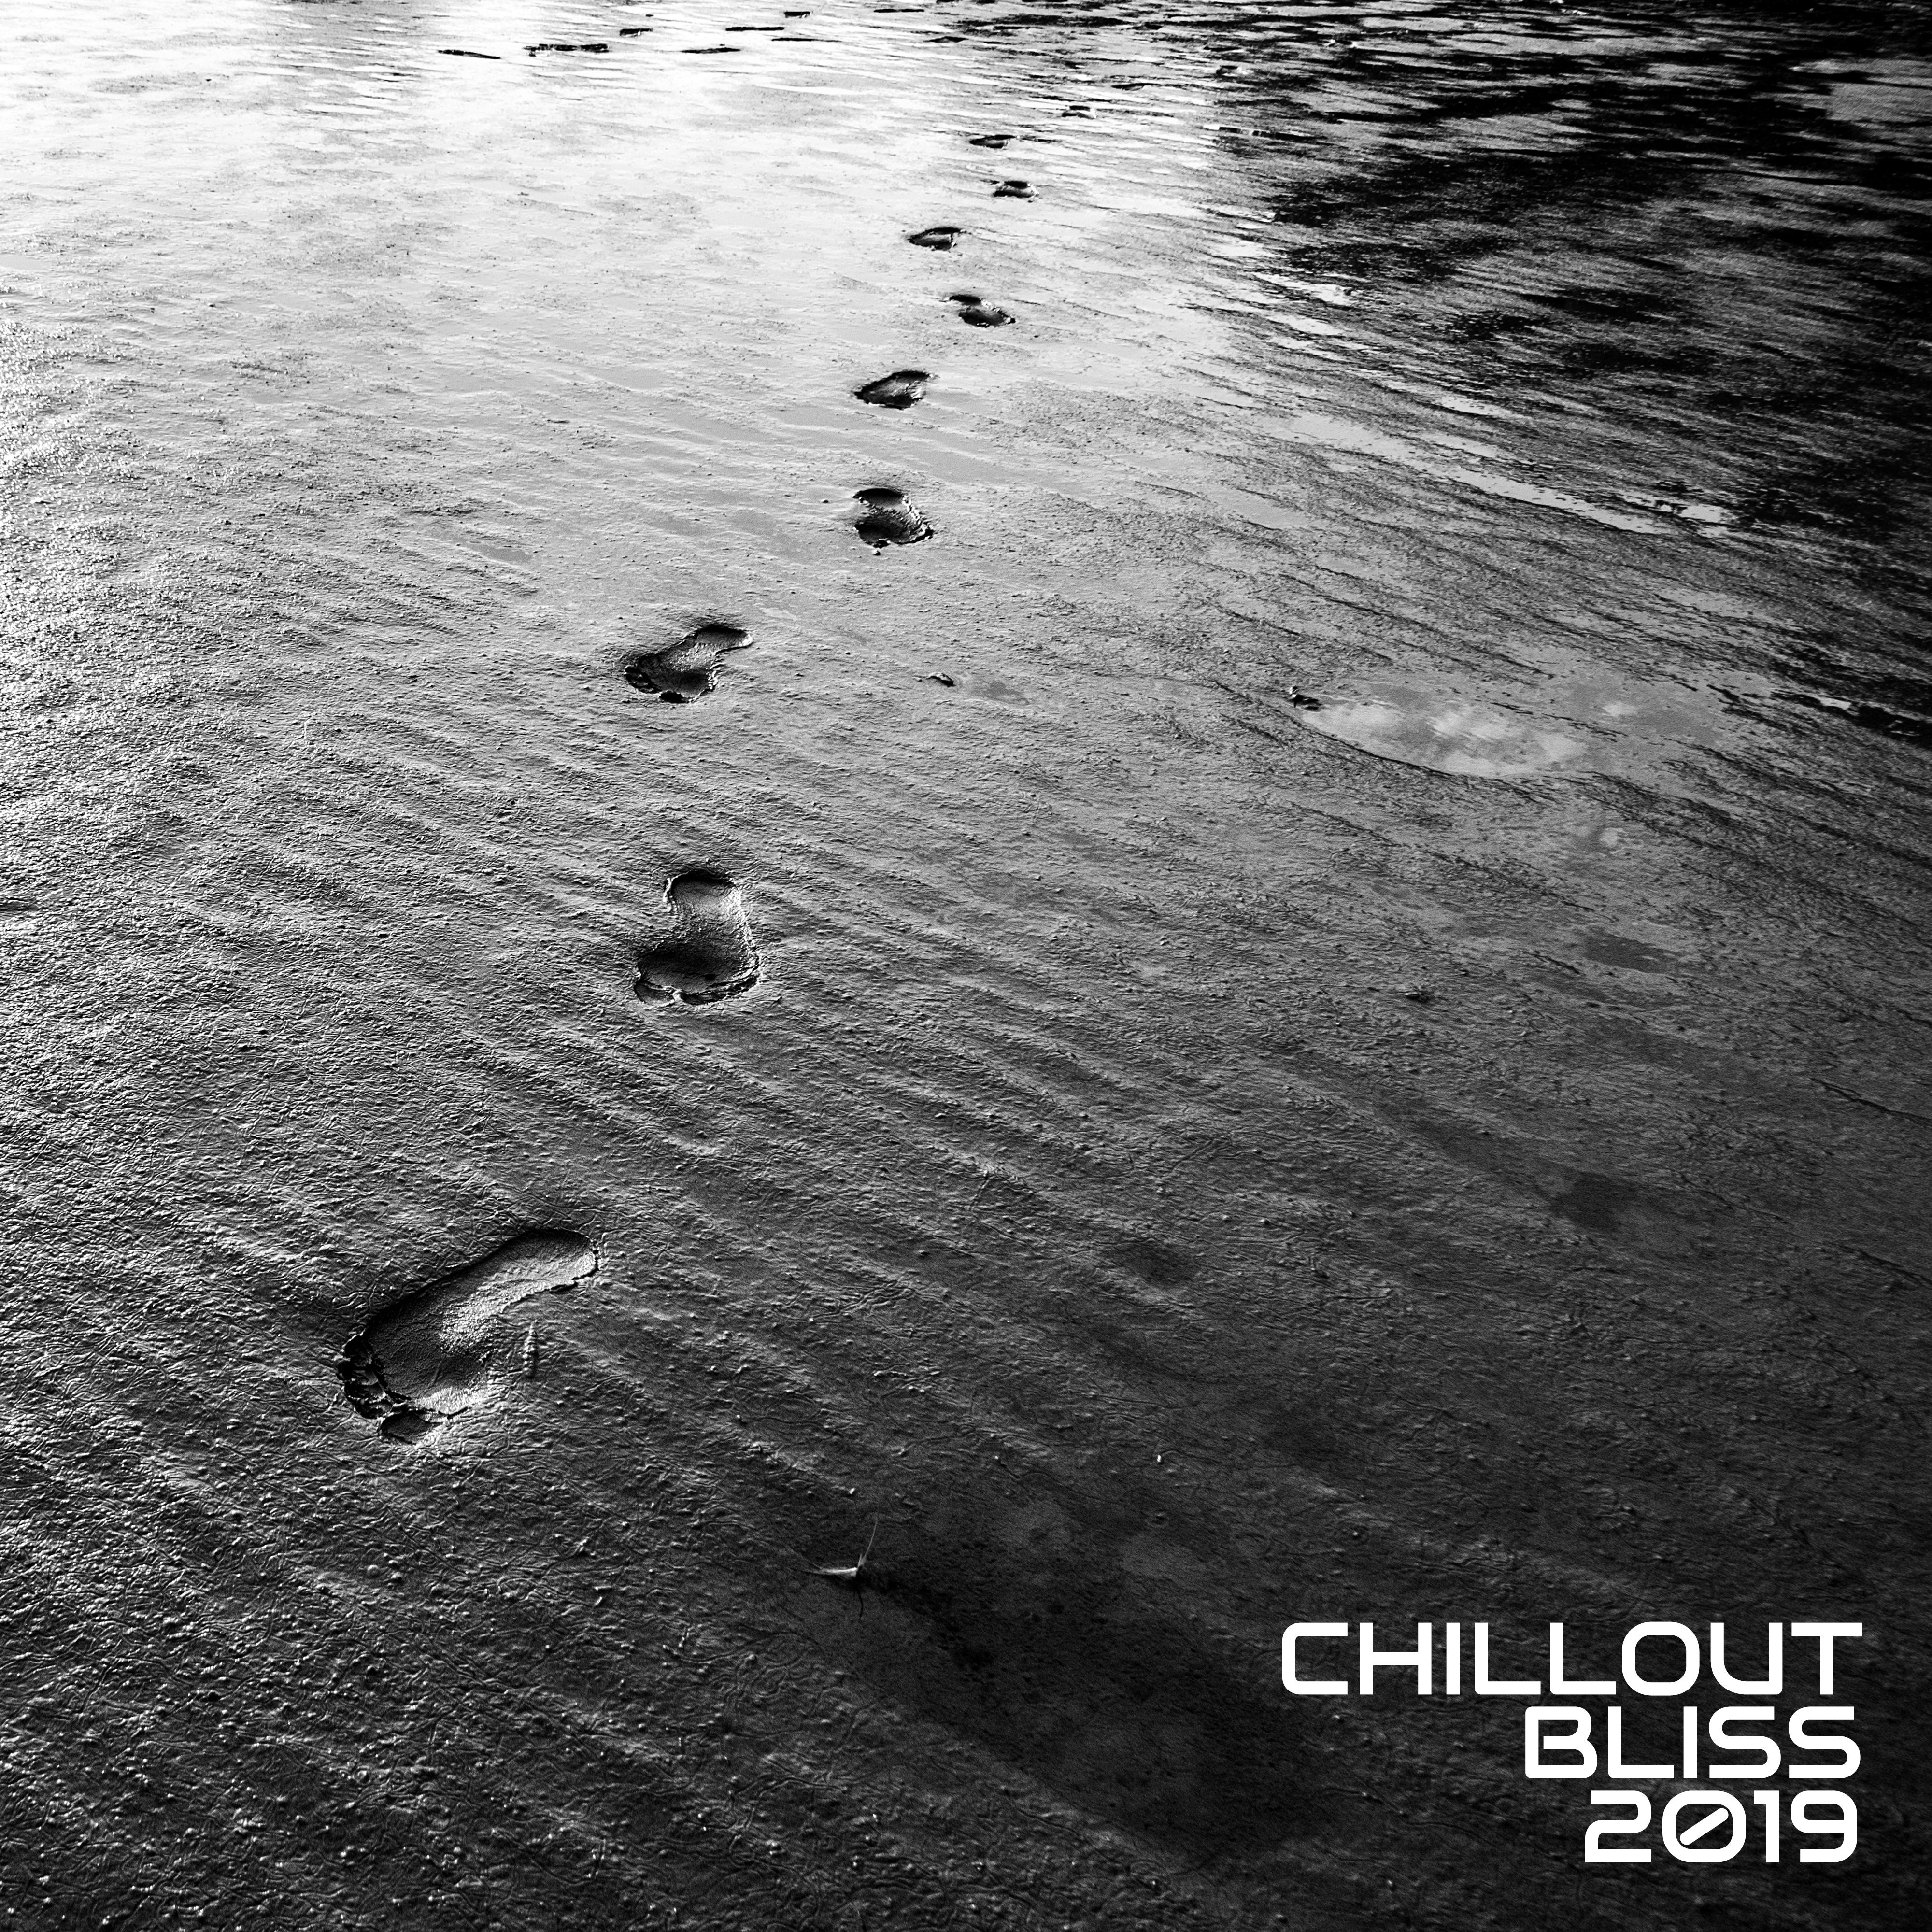 Chillout Bliss 2019 - Chillout Bar Lounge, Modern Chillout Sounds, Lounge, Best of Ambient Chillout 2019, Ibiza Chill Out, Relax, Summer 2019